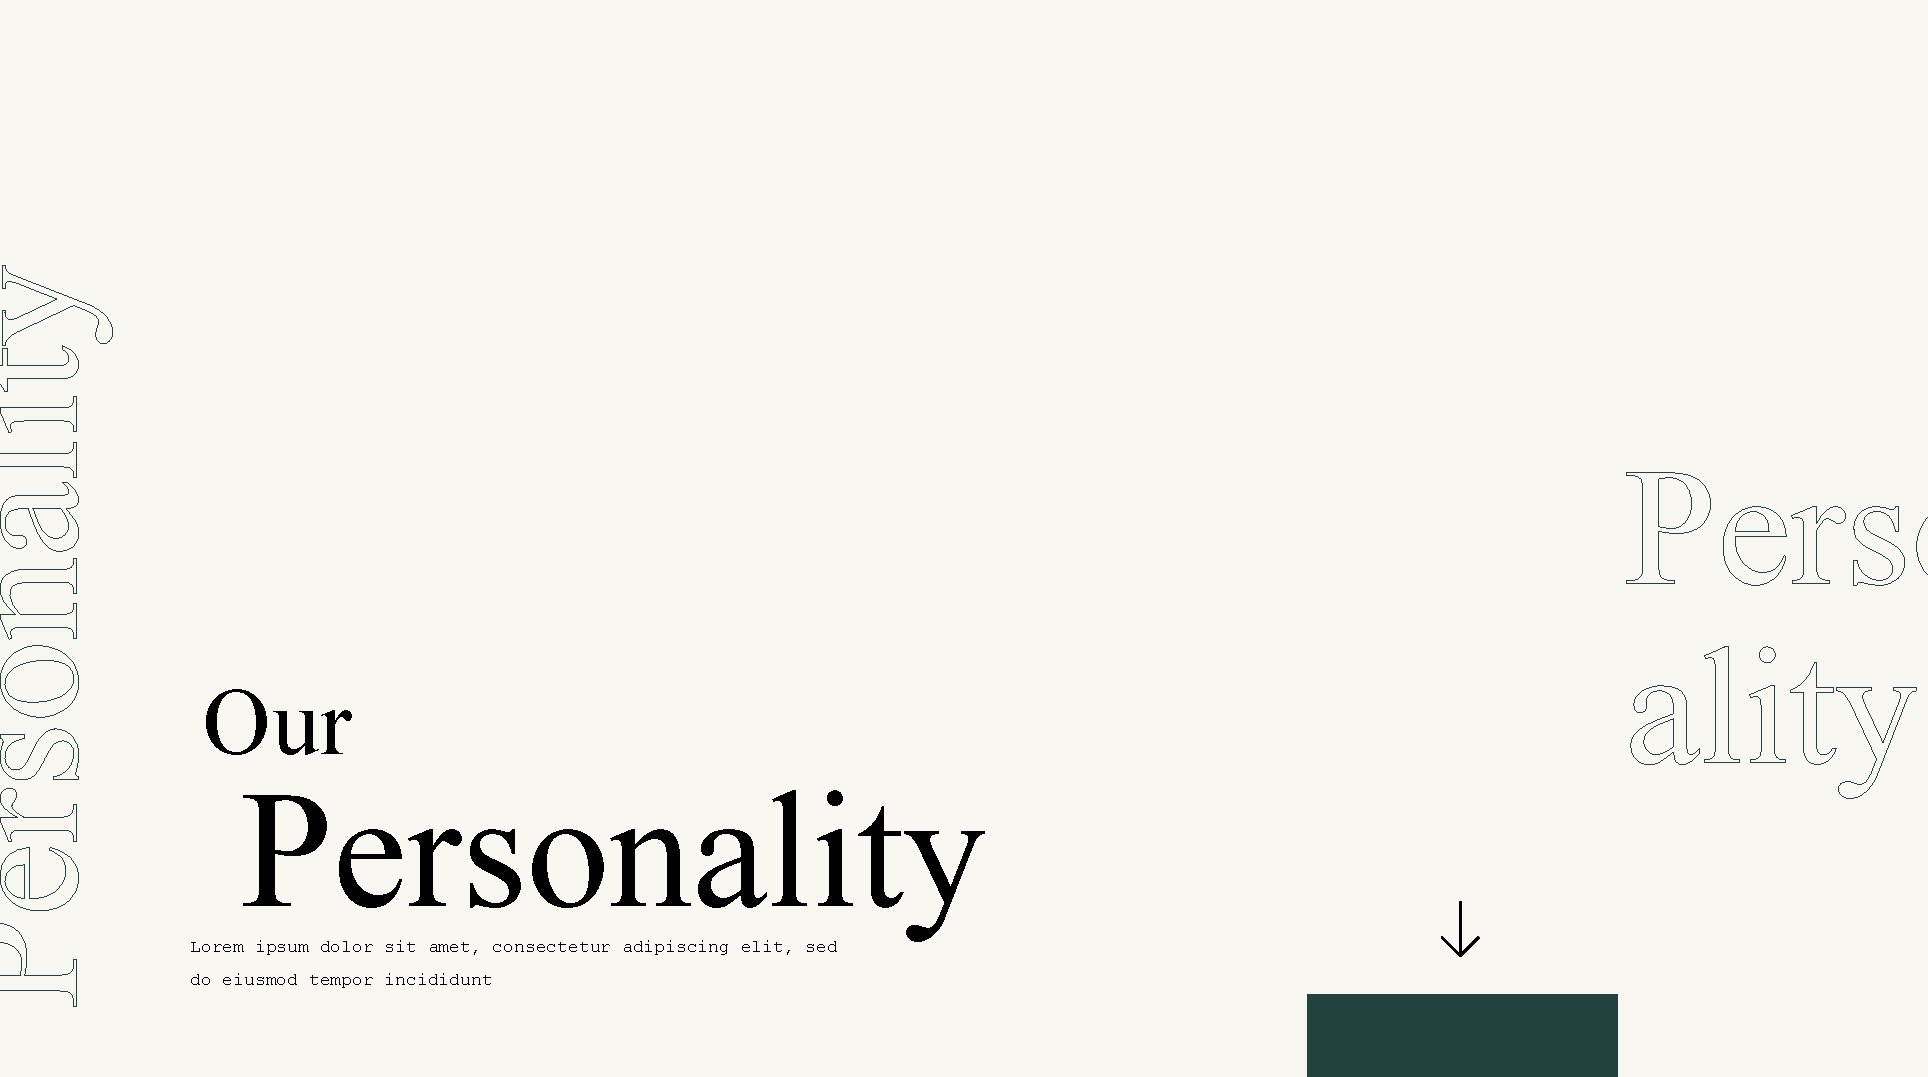 Personality Fashion - Presentation Ready for text here Lorem ipsum dolor sit amet, consectetur